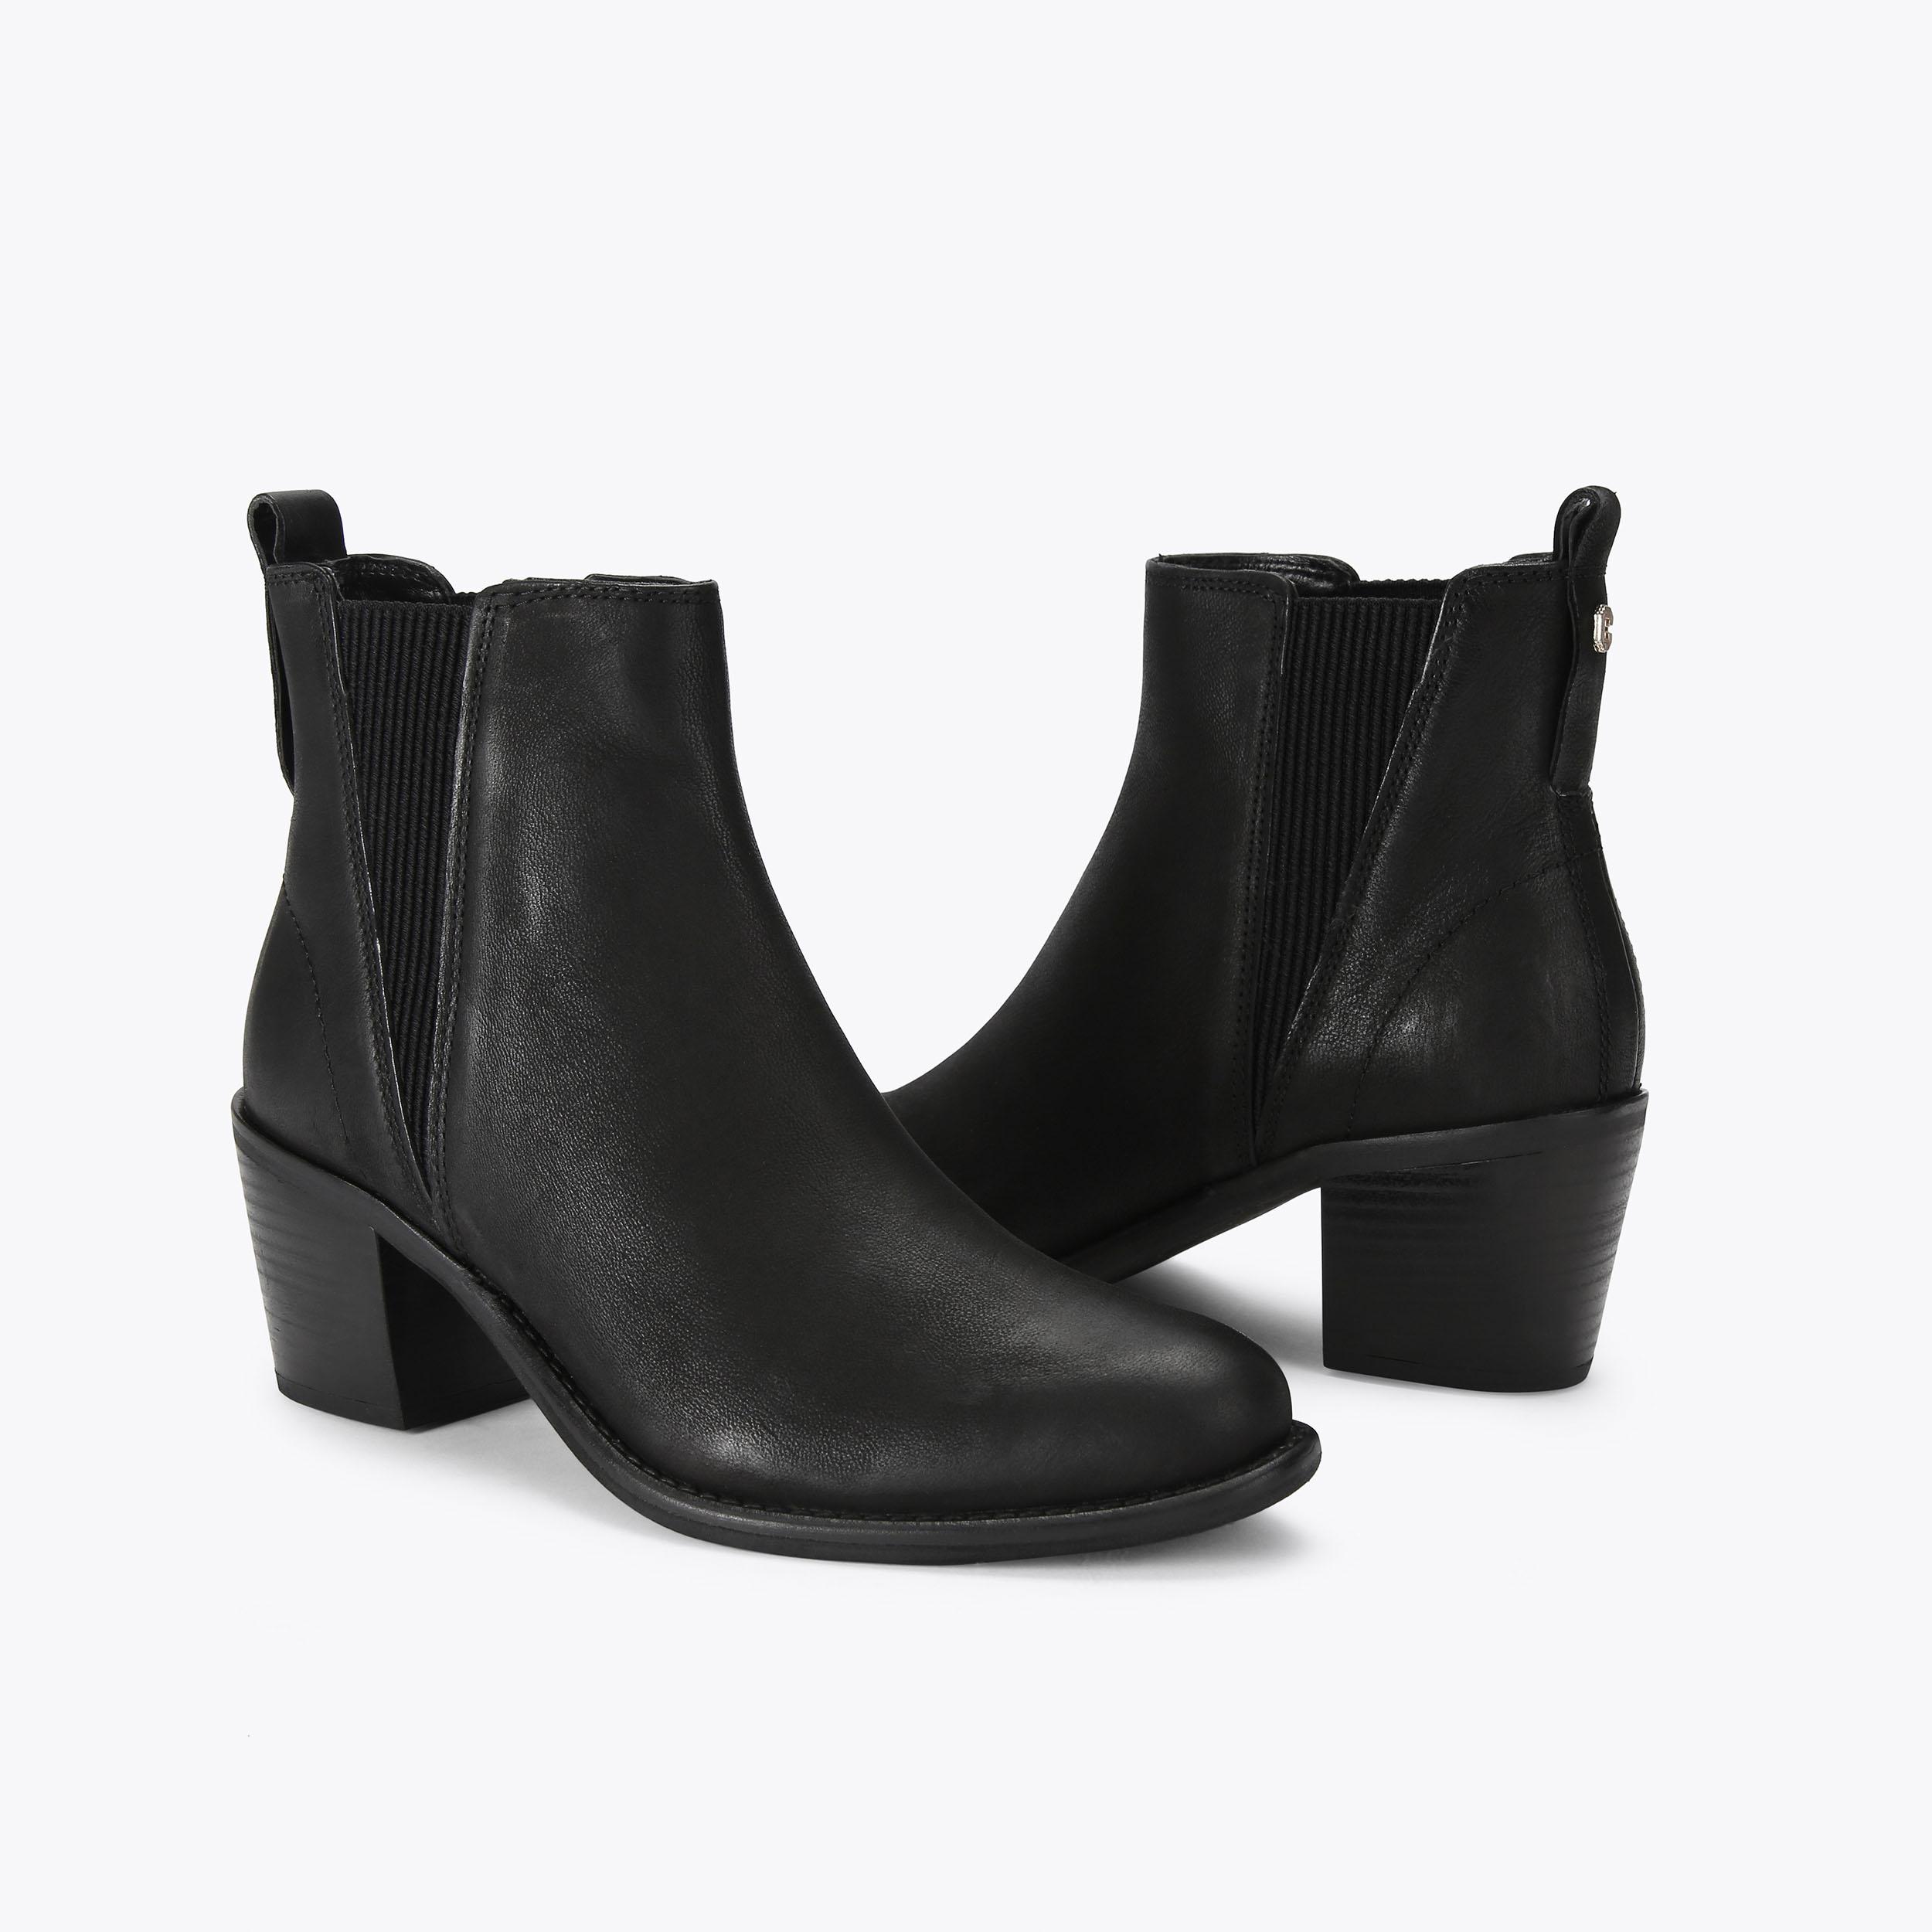 SECIL CHELSEA Black Leather Ankle Boots by CARVELA